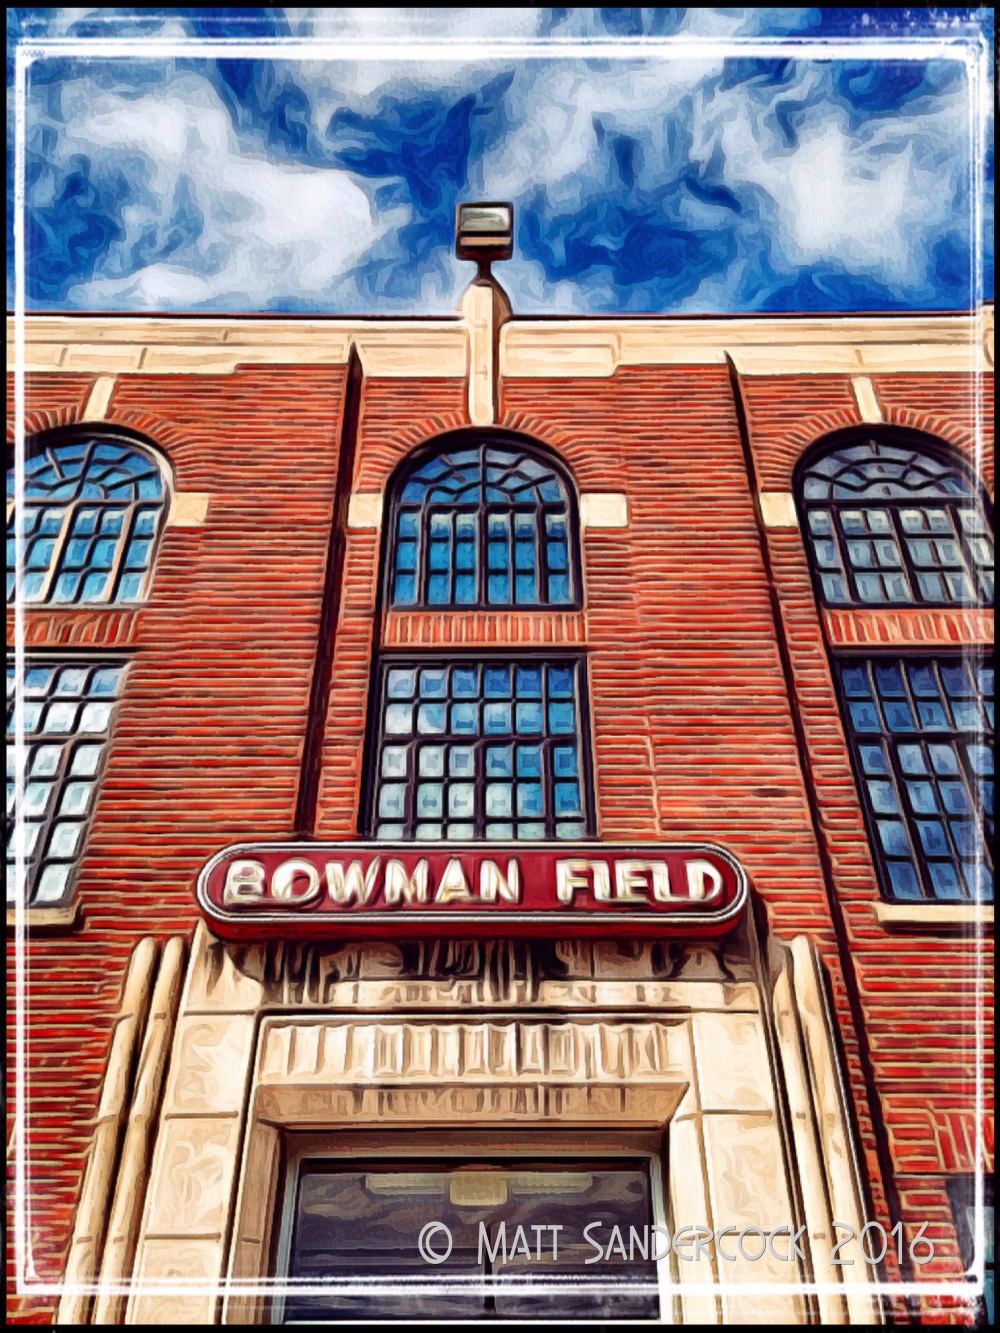 project 366, sign, iColorama, Bowman Field, Louisville, airport, windows, reflections, clouds